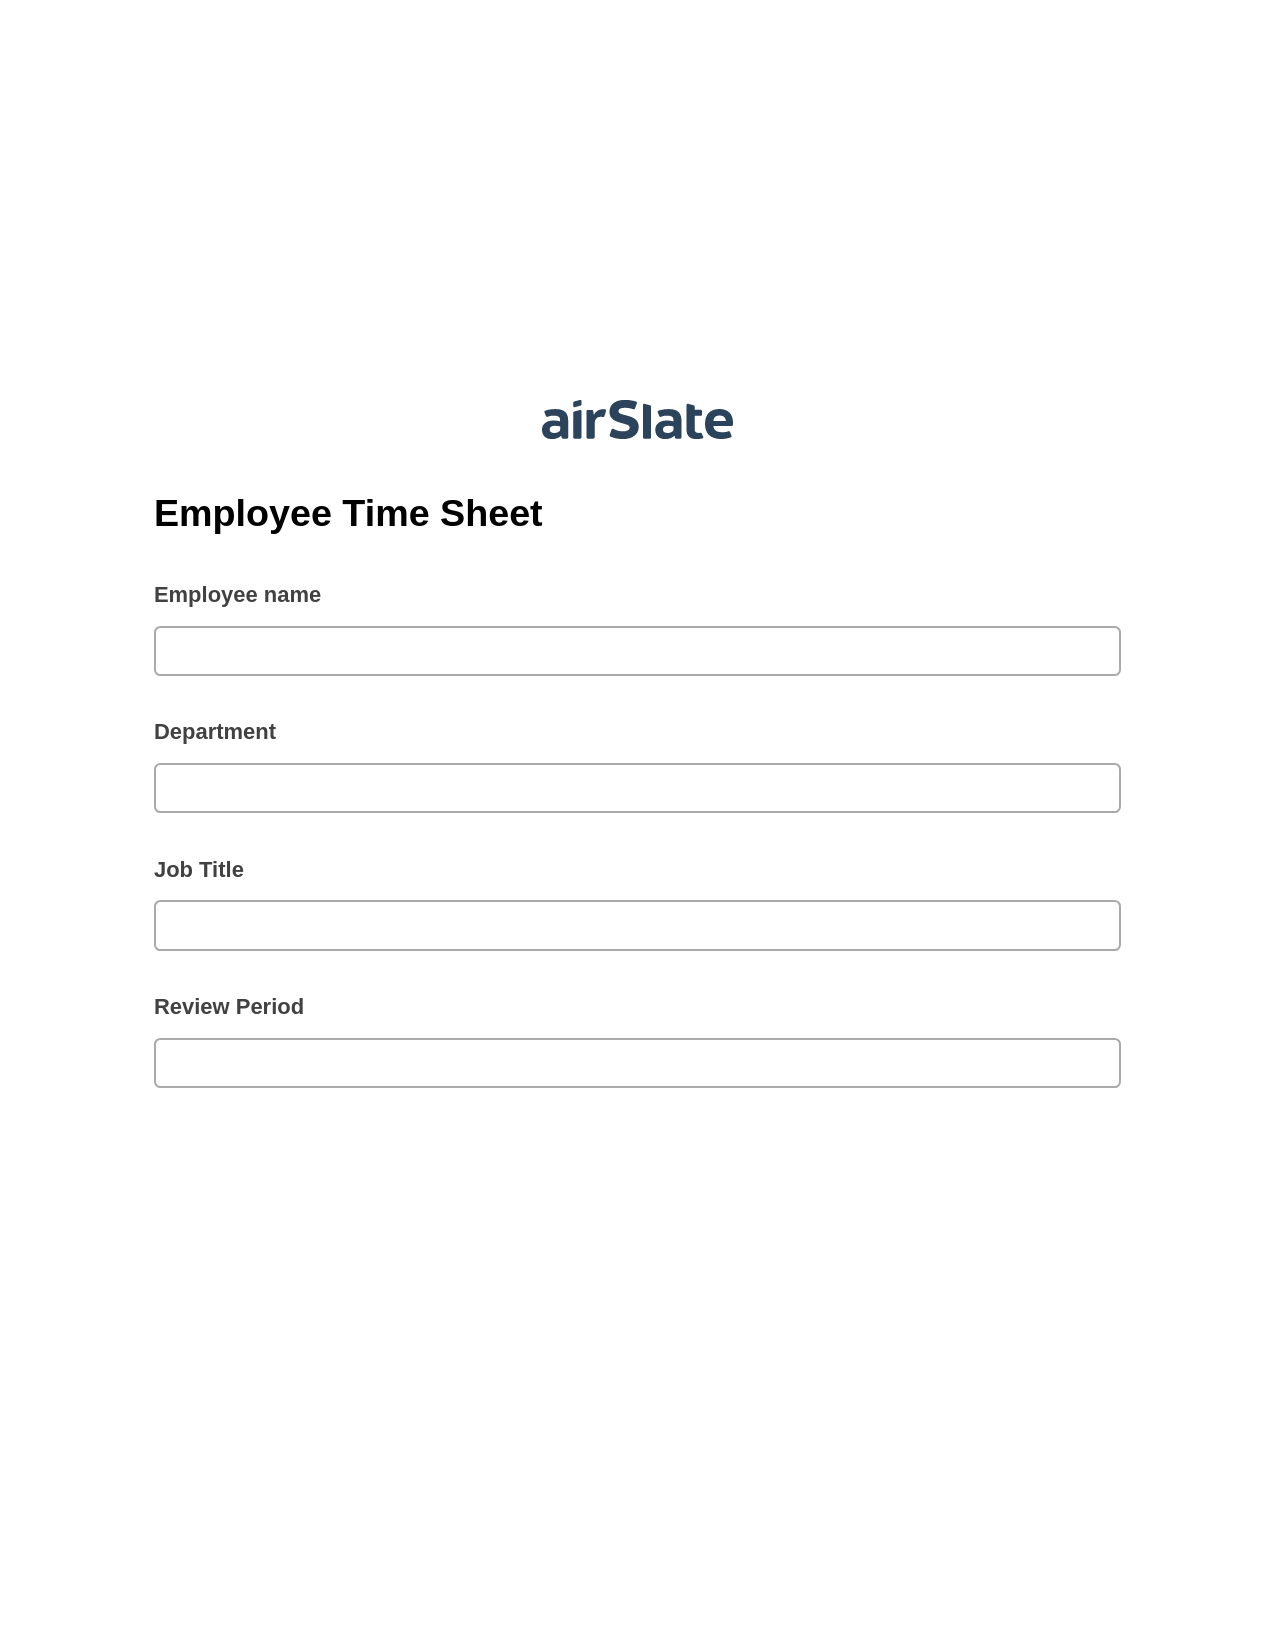 Multirole Employee Time Sheet Pre-fill from CSV File Bot, Create slate addon, Archive to Box Bot